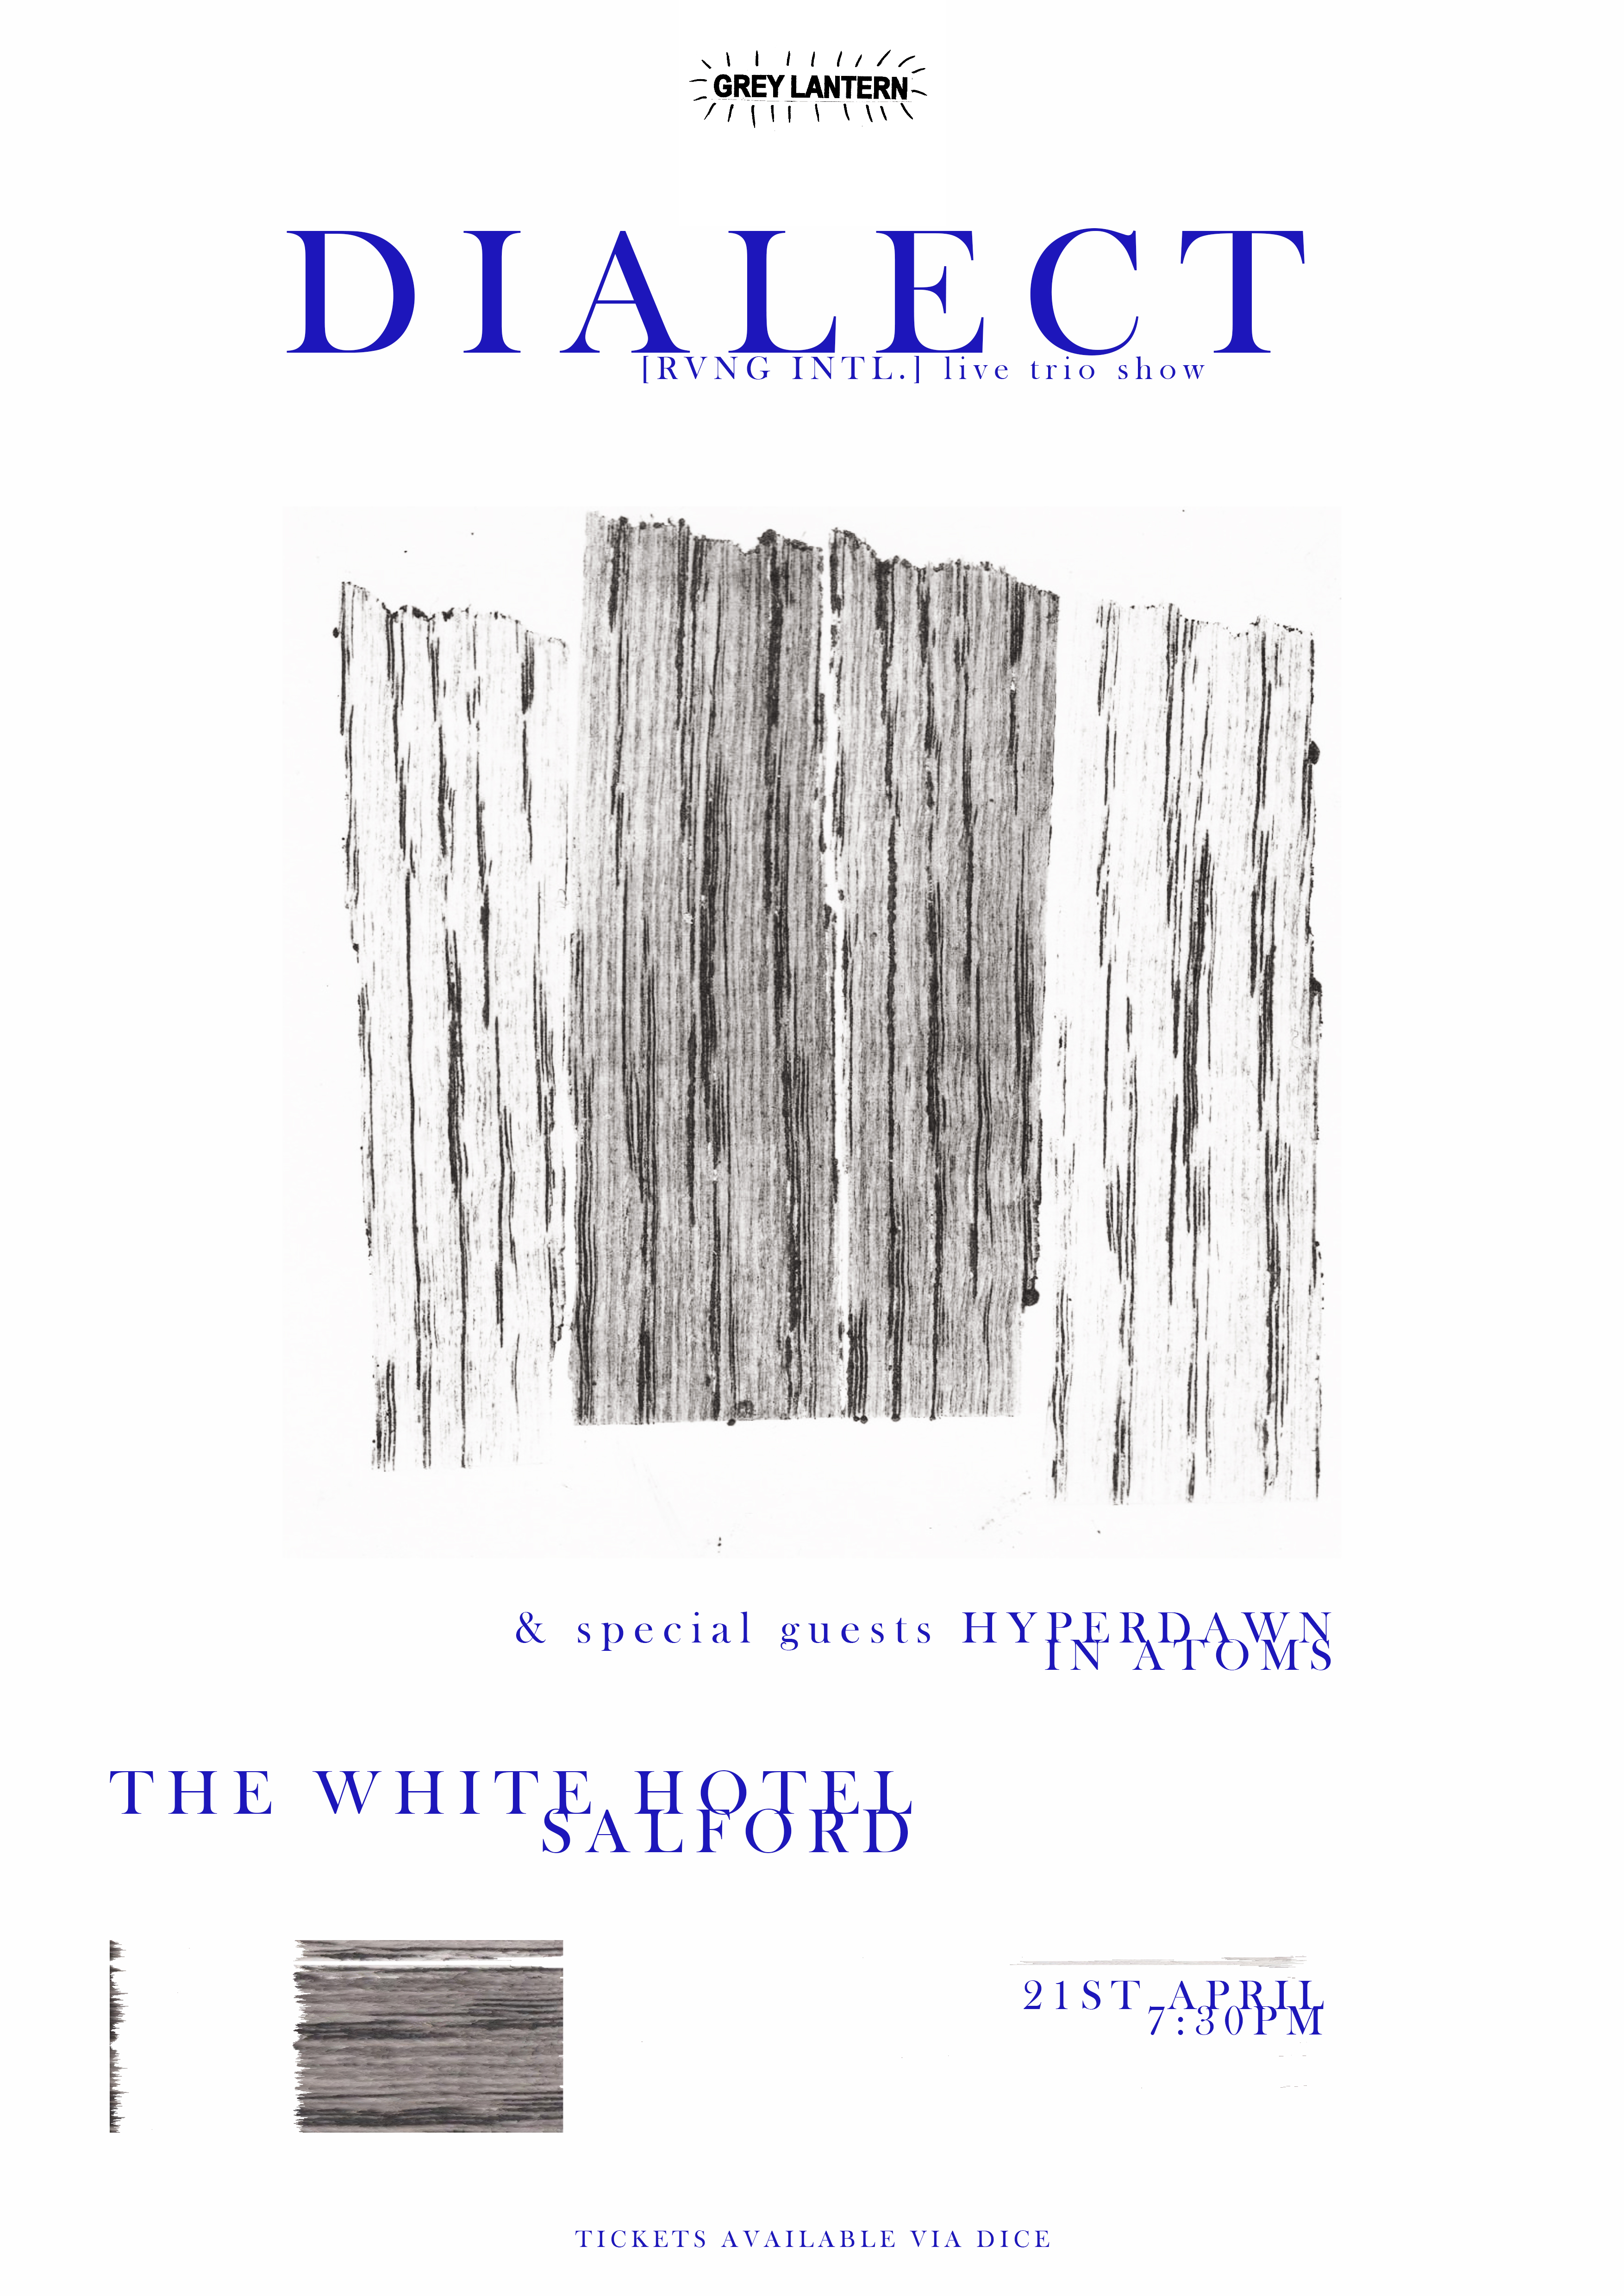 Grey Lantern presents: Dialect Hyperdawn In Atoms at The White Hotel,  Manchester